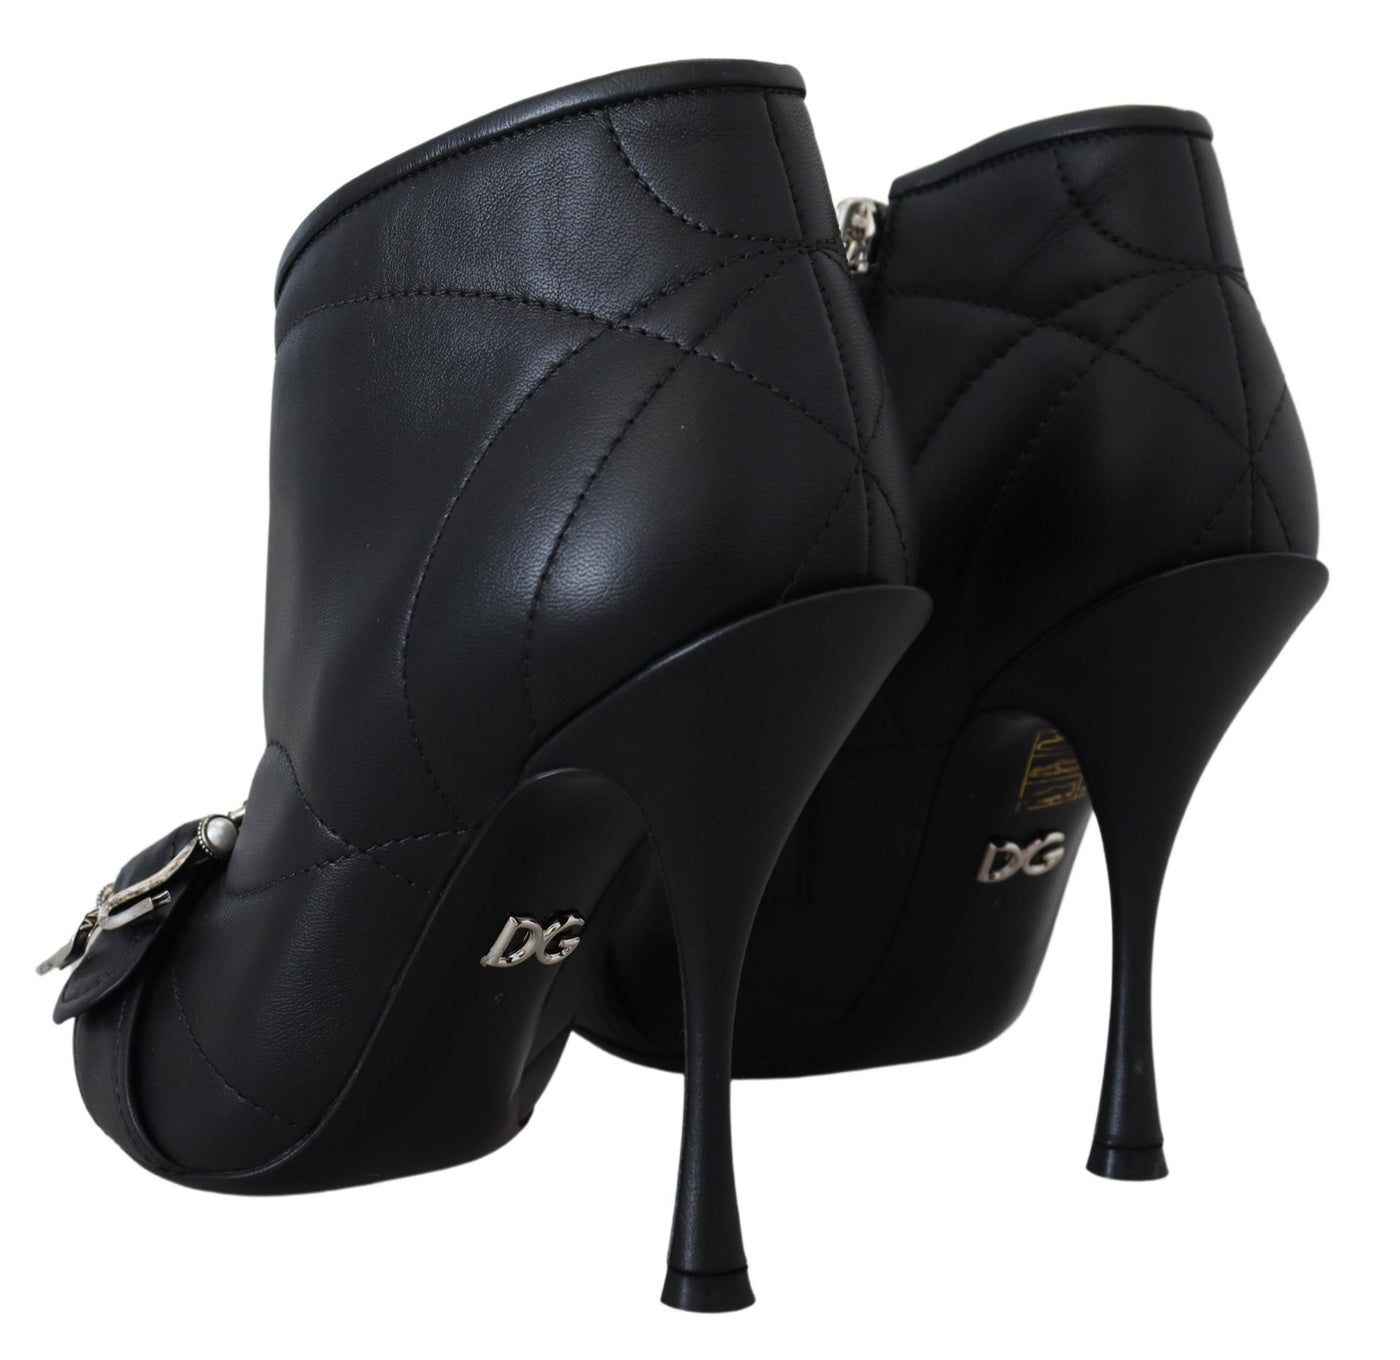 Black Devotion Quilted Buckled Ankle Boots Shoes